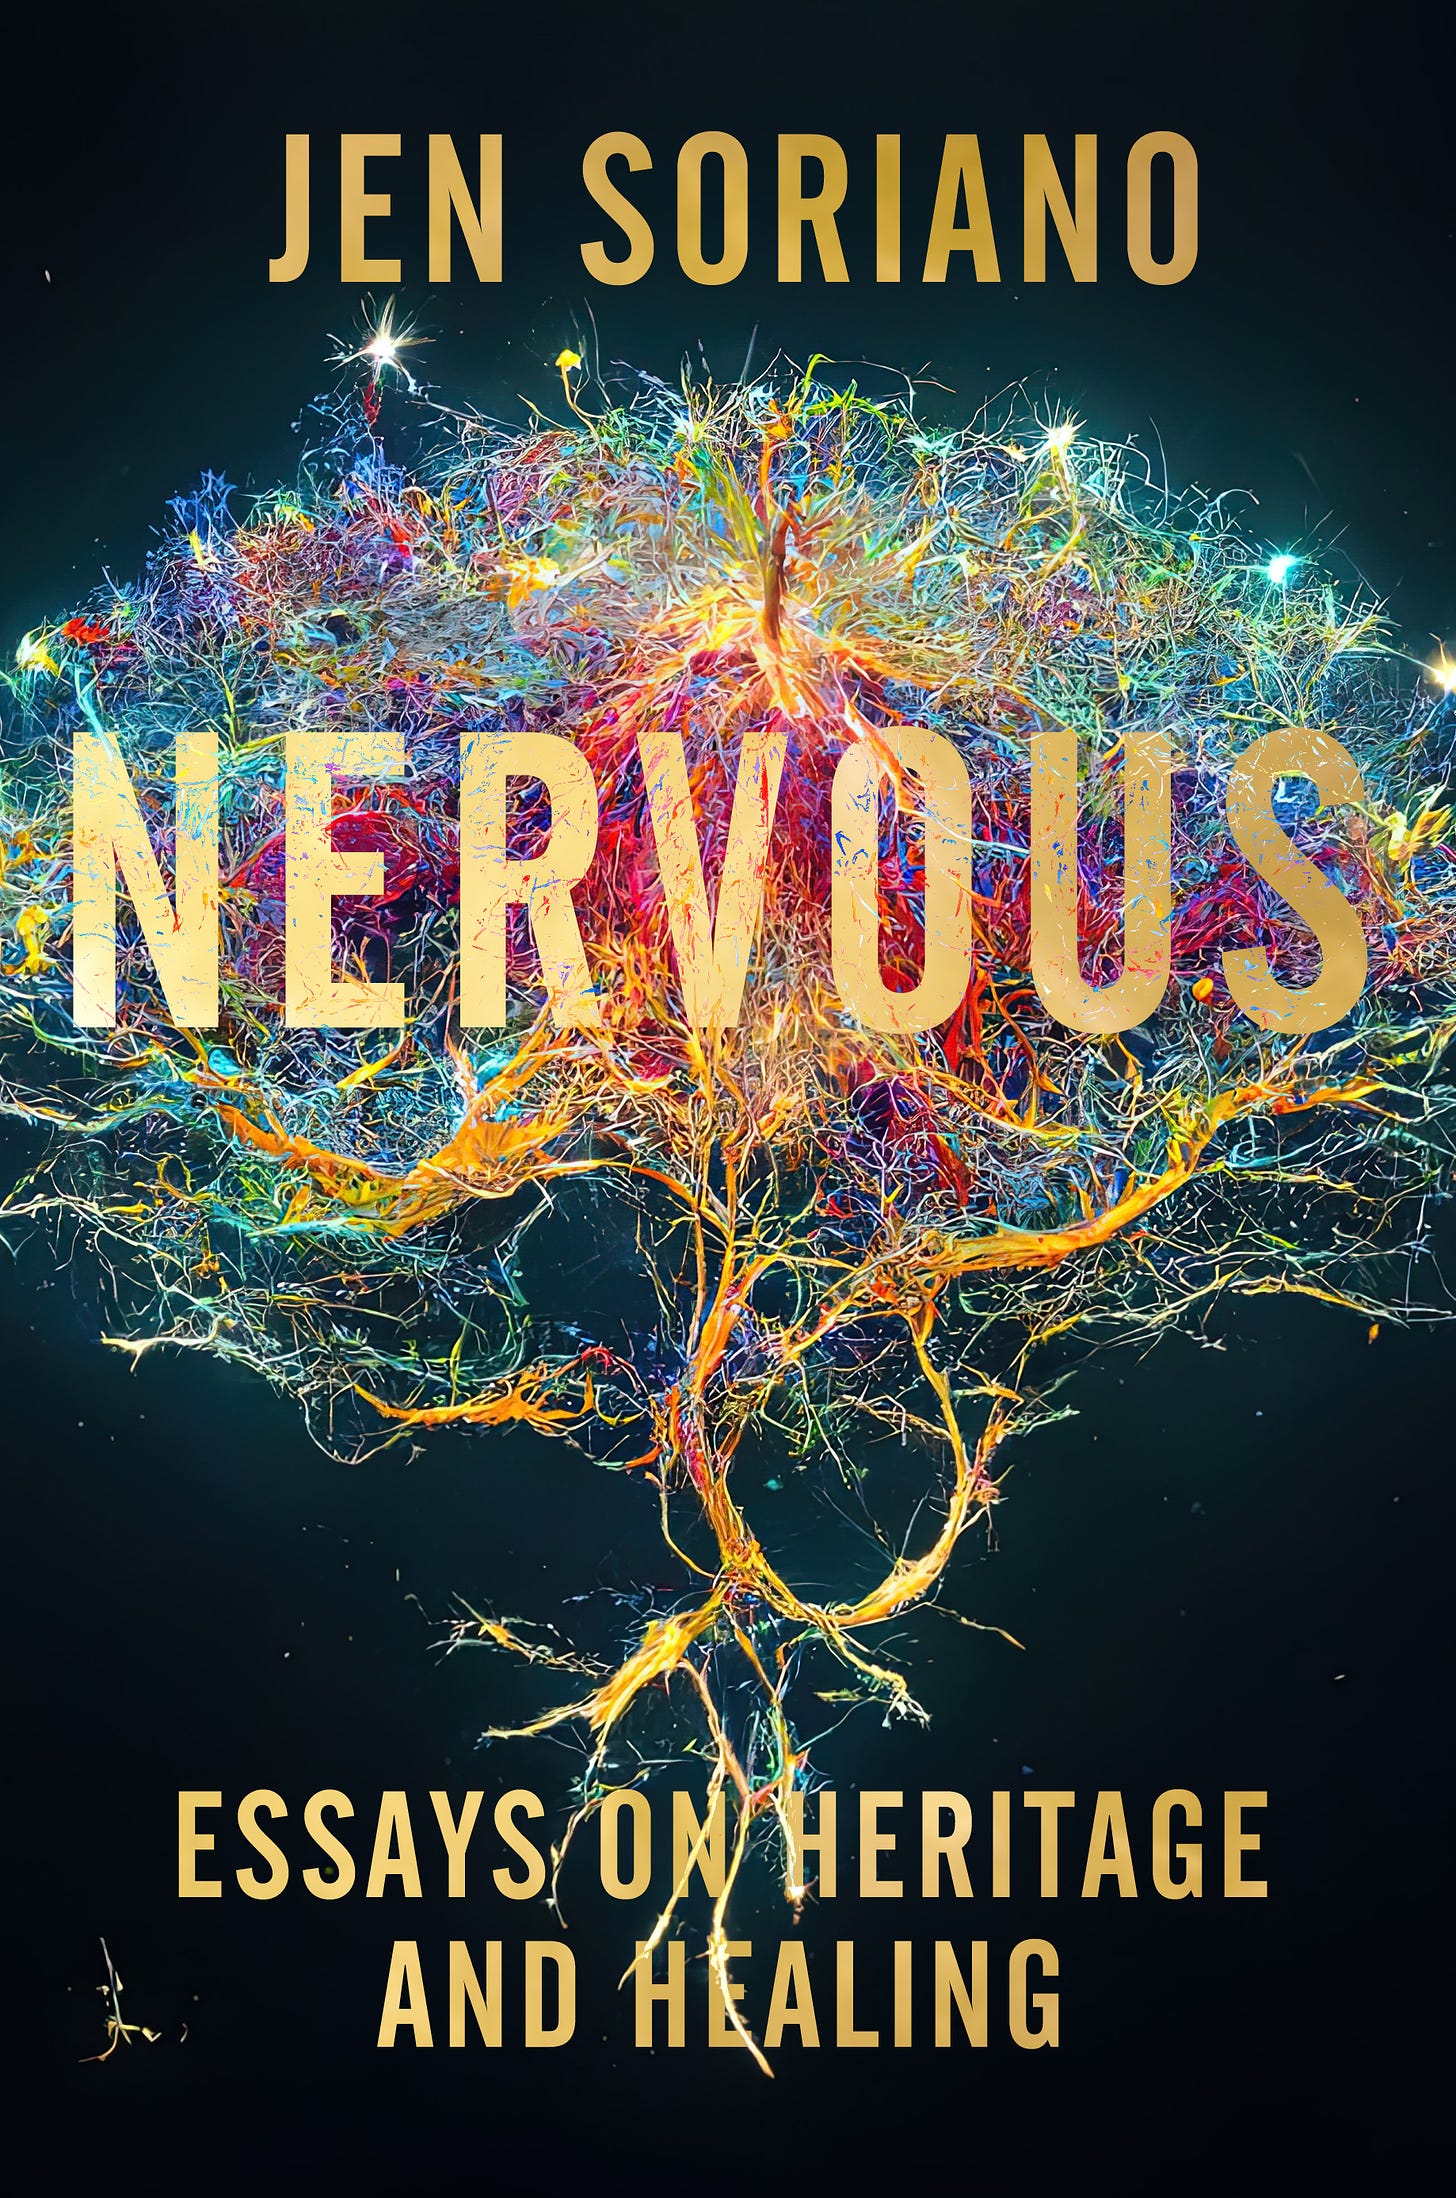 Book cover with a black background. In yellow letters in all caps, JEN SORIANO, NERVOUS: ESSAYS ON HERITAGE AND HEALING. In the center is an illustration of nerves in the brain in brilliant rainbow colors with roots, branches, and tendrils that looks like a tree.